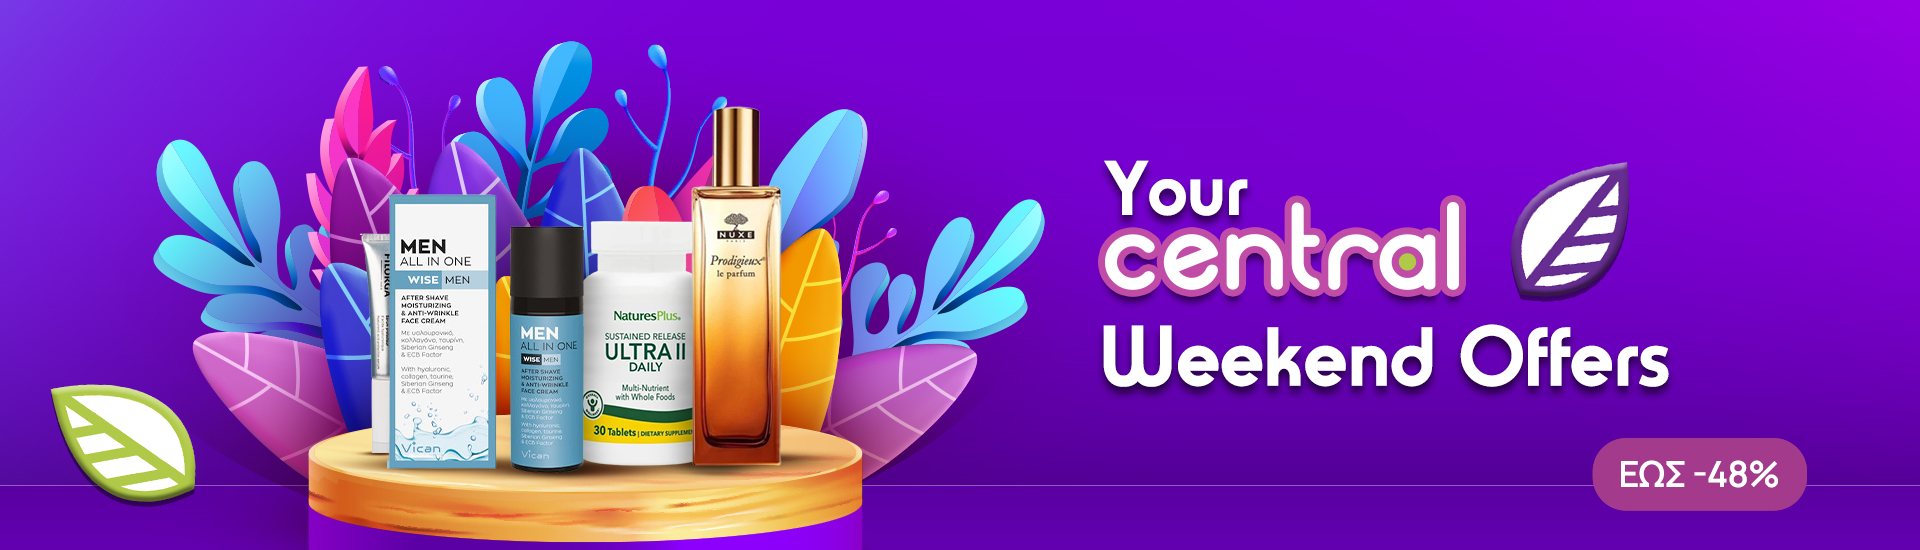 Your Central Weekend Offers